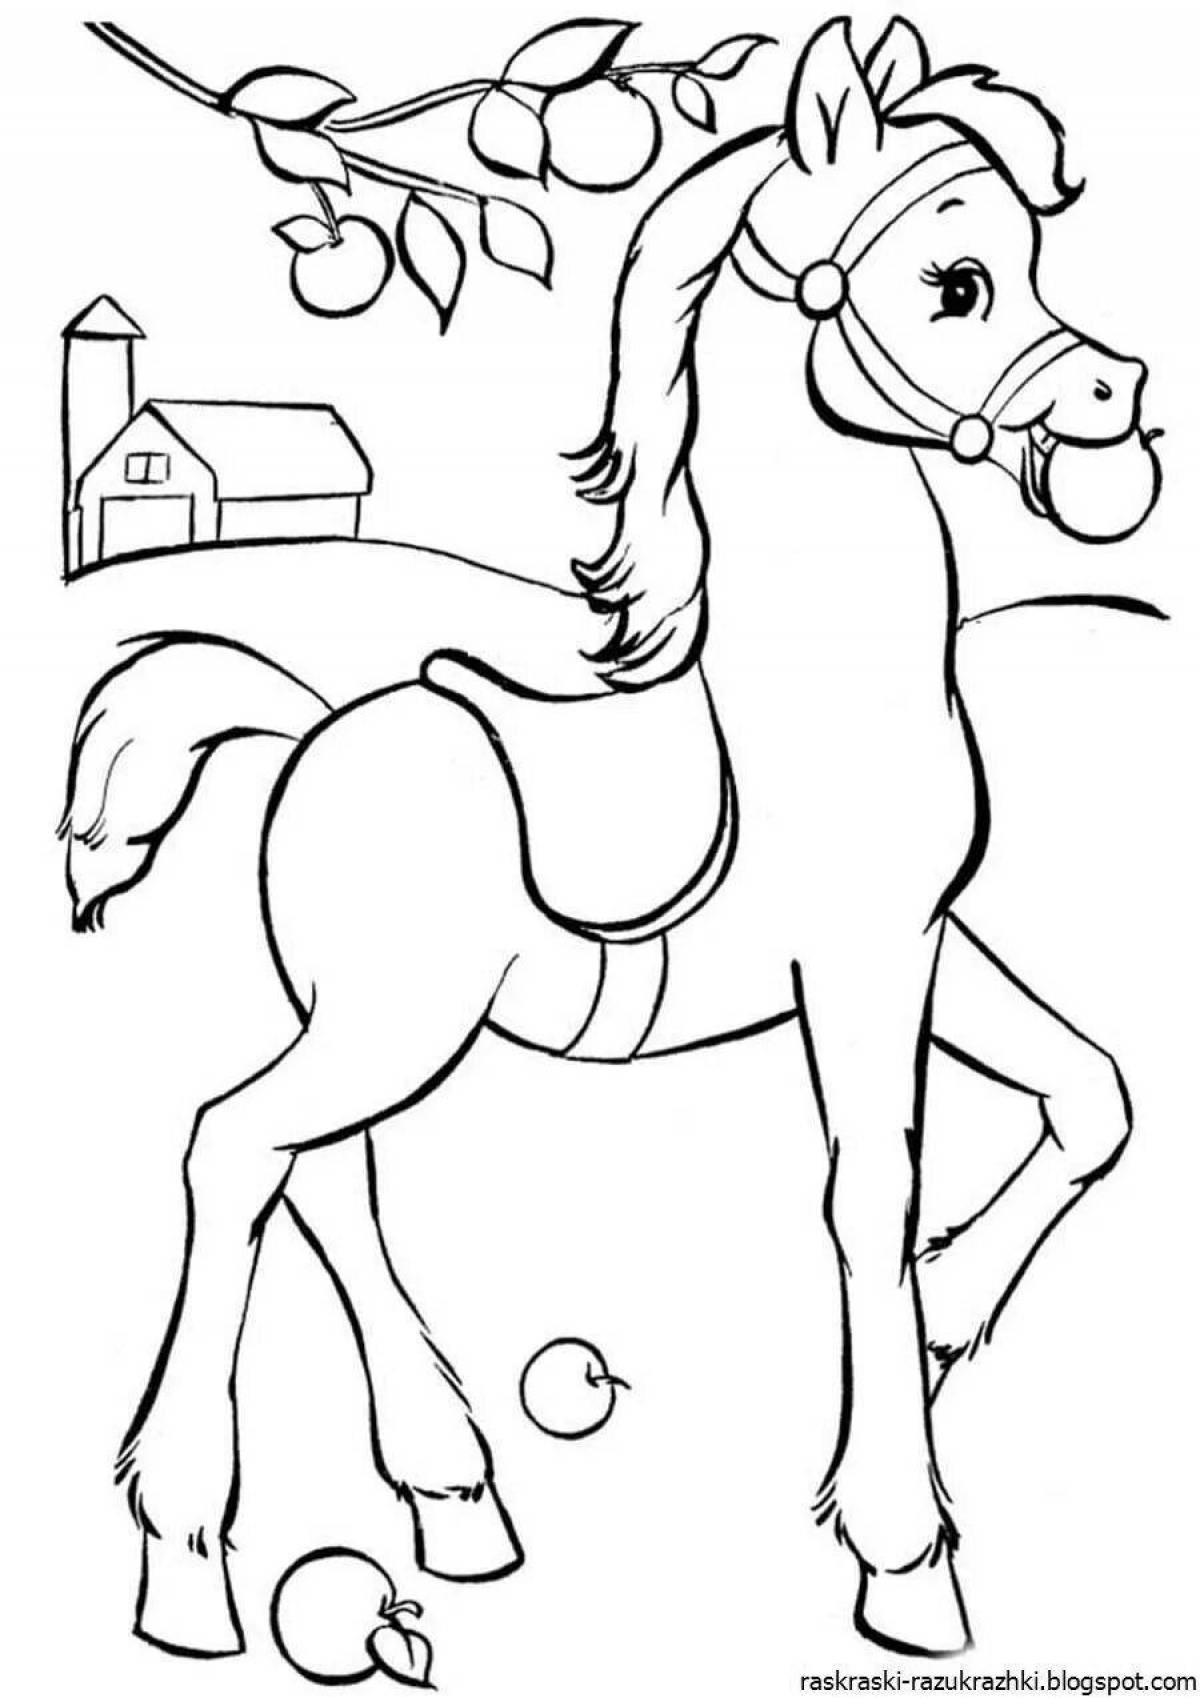 Great drawing of a horse for kids